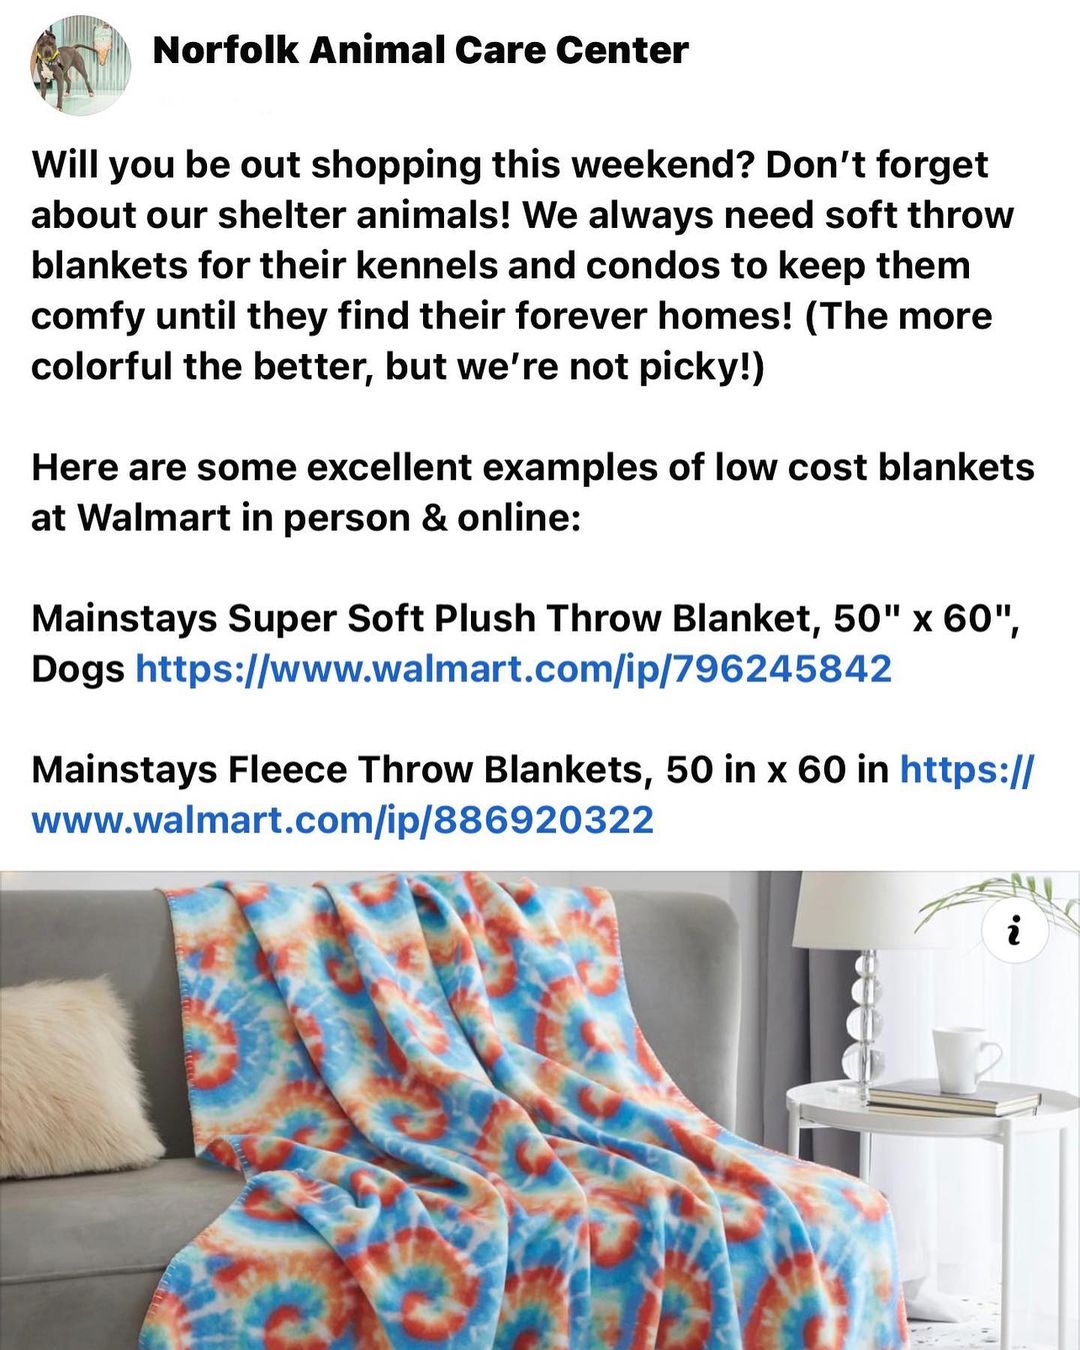 Will you be out shopping this weekend? Don't forget
about our shelter animals! We always need soft throw
blankets for their kennels and condos to keep them
comfy until they find their forever homes! (The more
colorful the better, but we're not picky!)
Here are some excellent examples of low cost blankets
at Walmart in person & online:
Mainstays Super Soft Plush Throw Blanket, 50